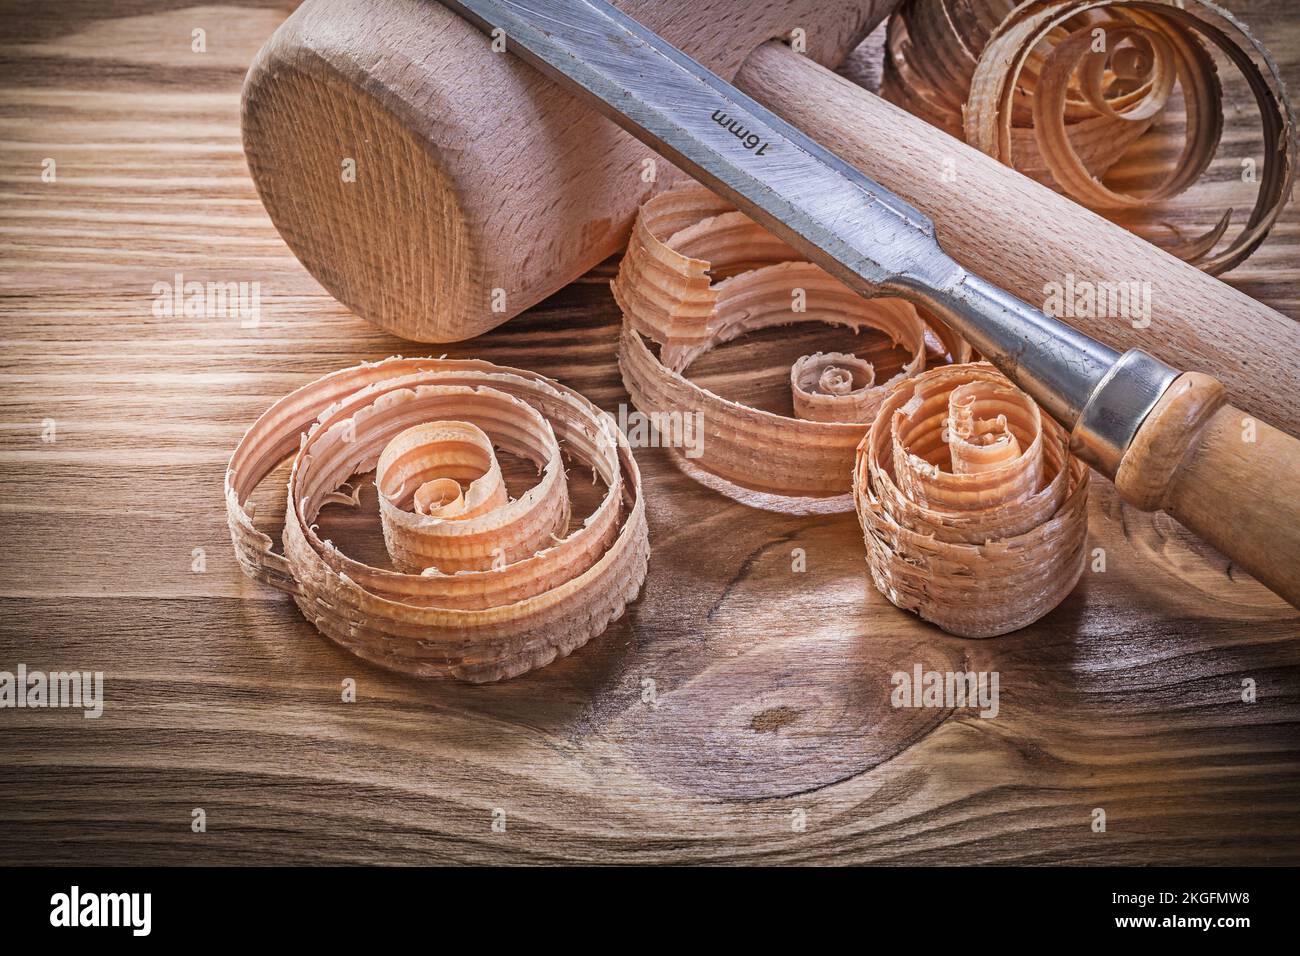 Wooden mallet flat chisels curled shavings on vintage wood board construction concept. Stock Photo